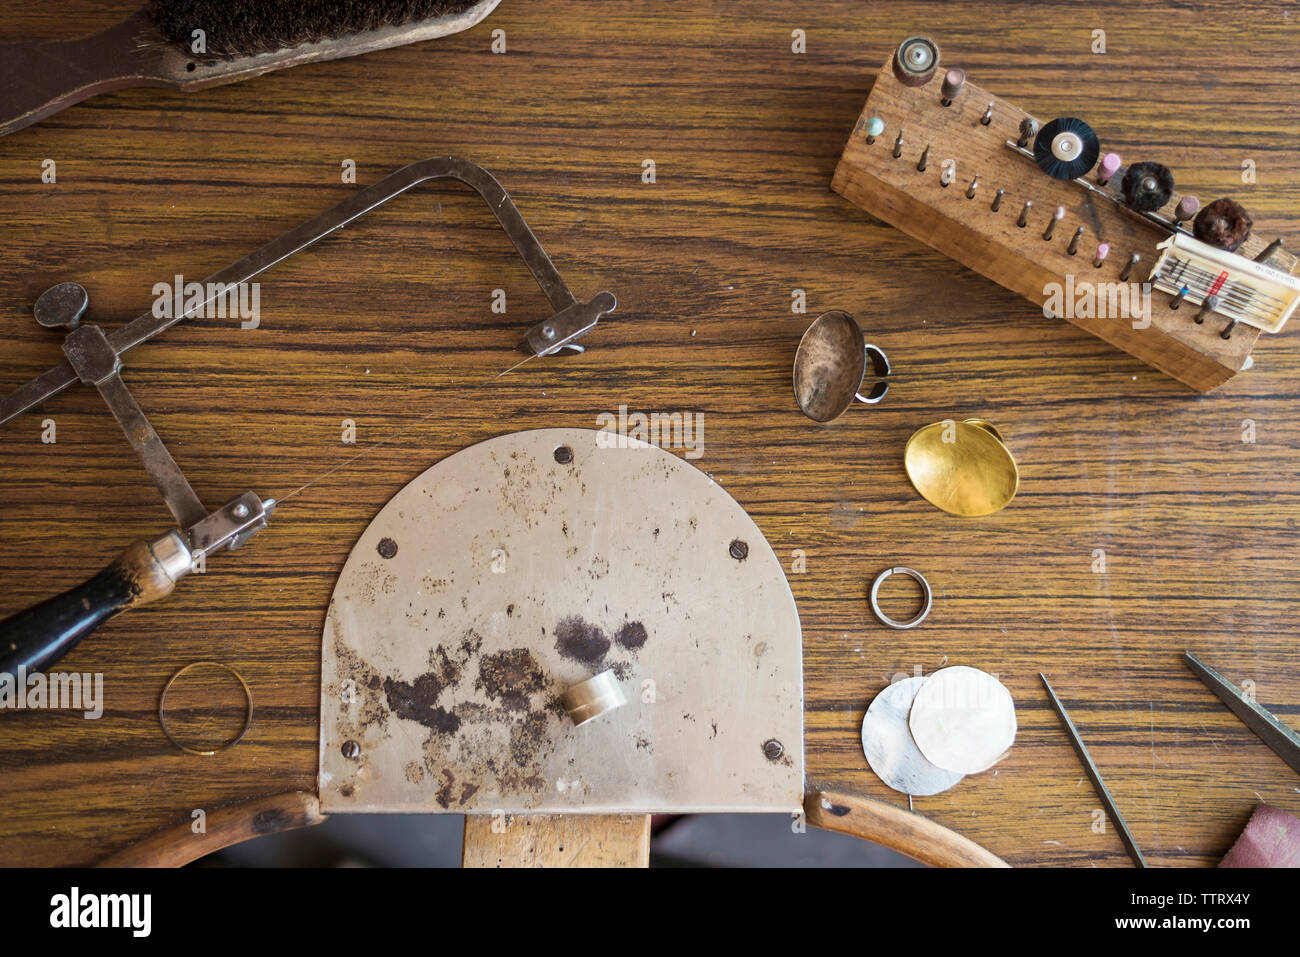 Overhead view of work tools with ring on wooden workbench in workshop Stock Photo